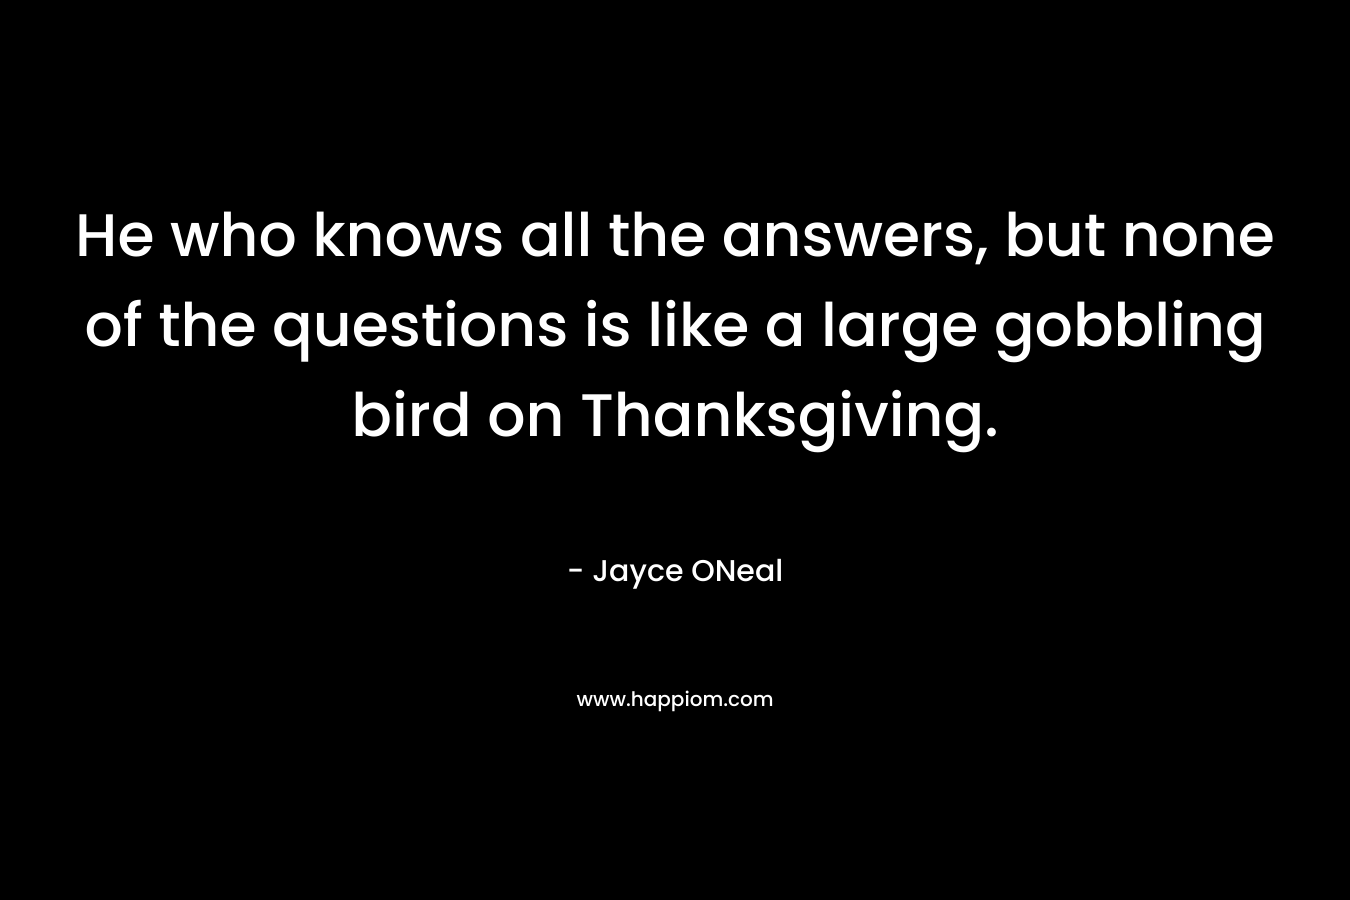 He who knows all the answers, but none of the questions is like a large gobbling bird on Thanksgiving.